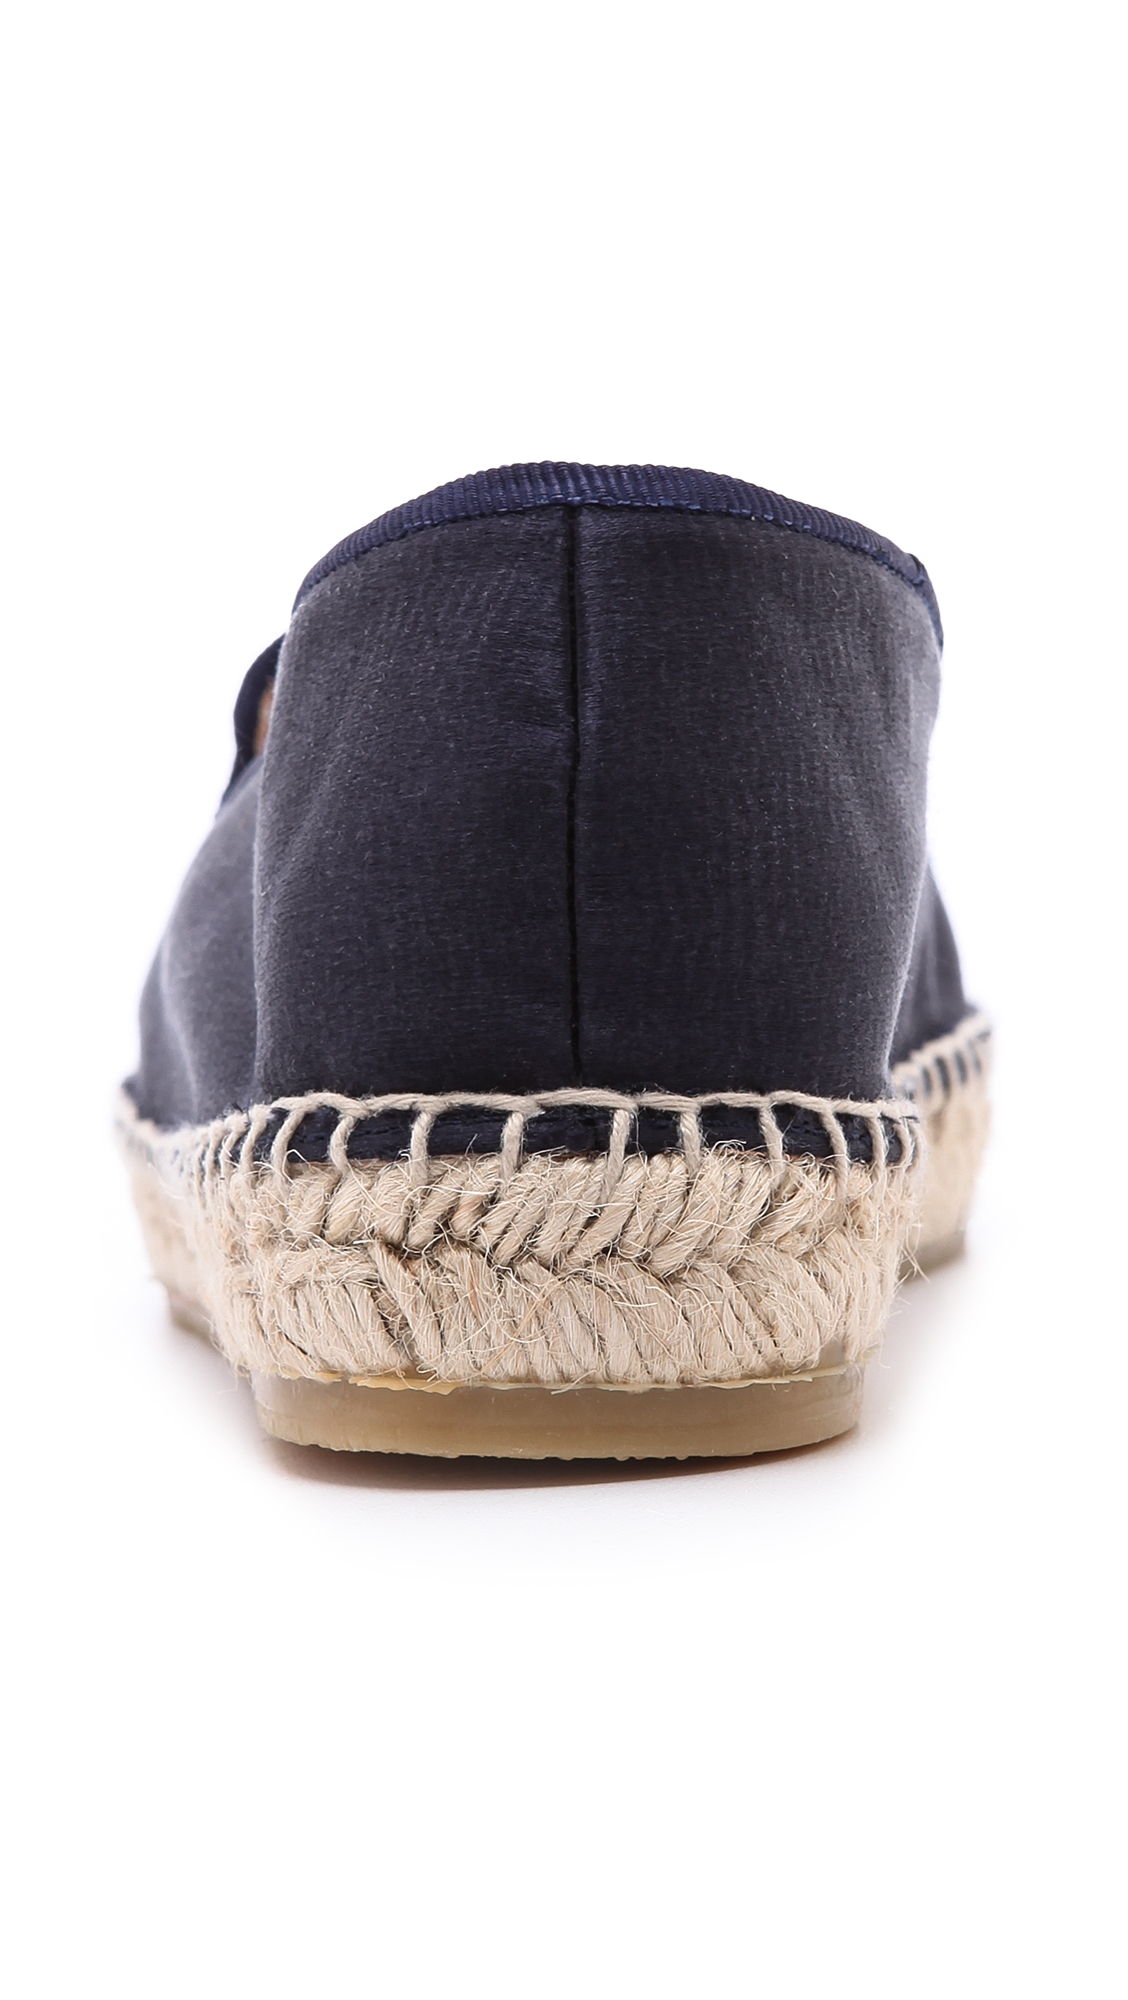 Marc By Marc Jacobs Sleeping Mouse Espadrilles in Navy (Blue) - Lyst